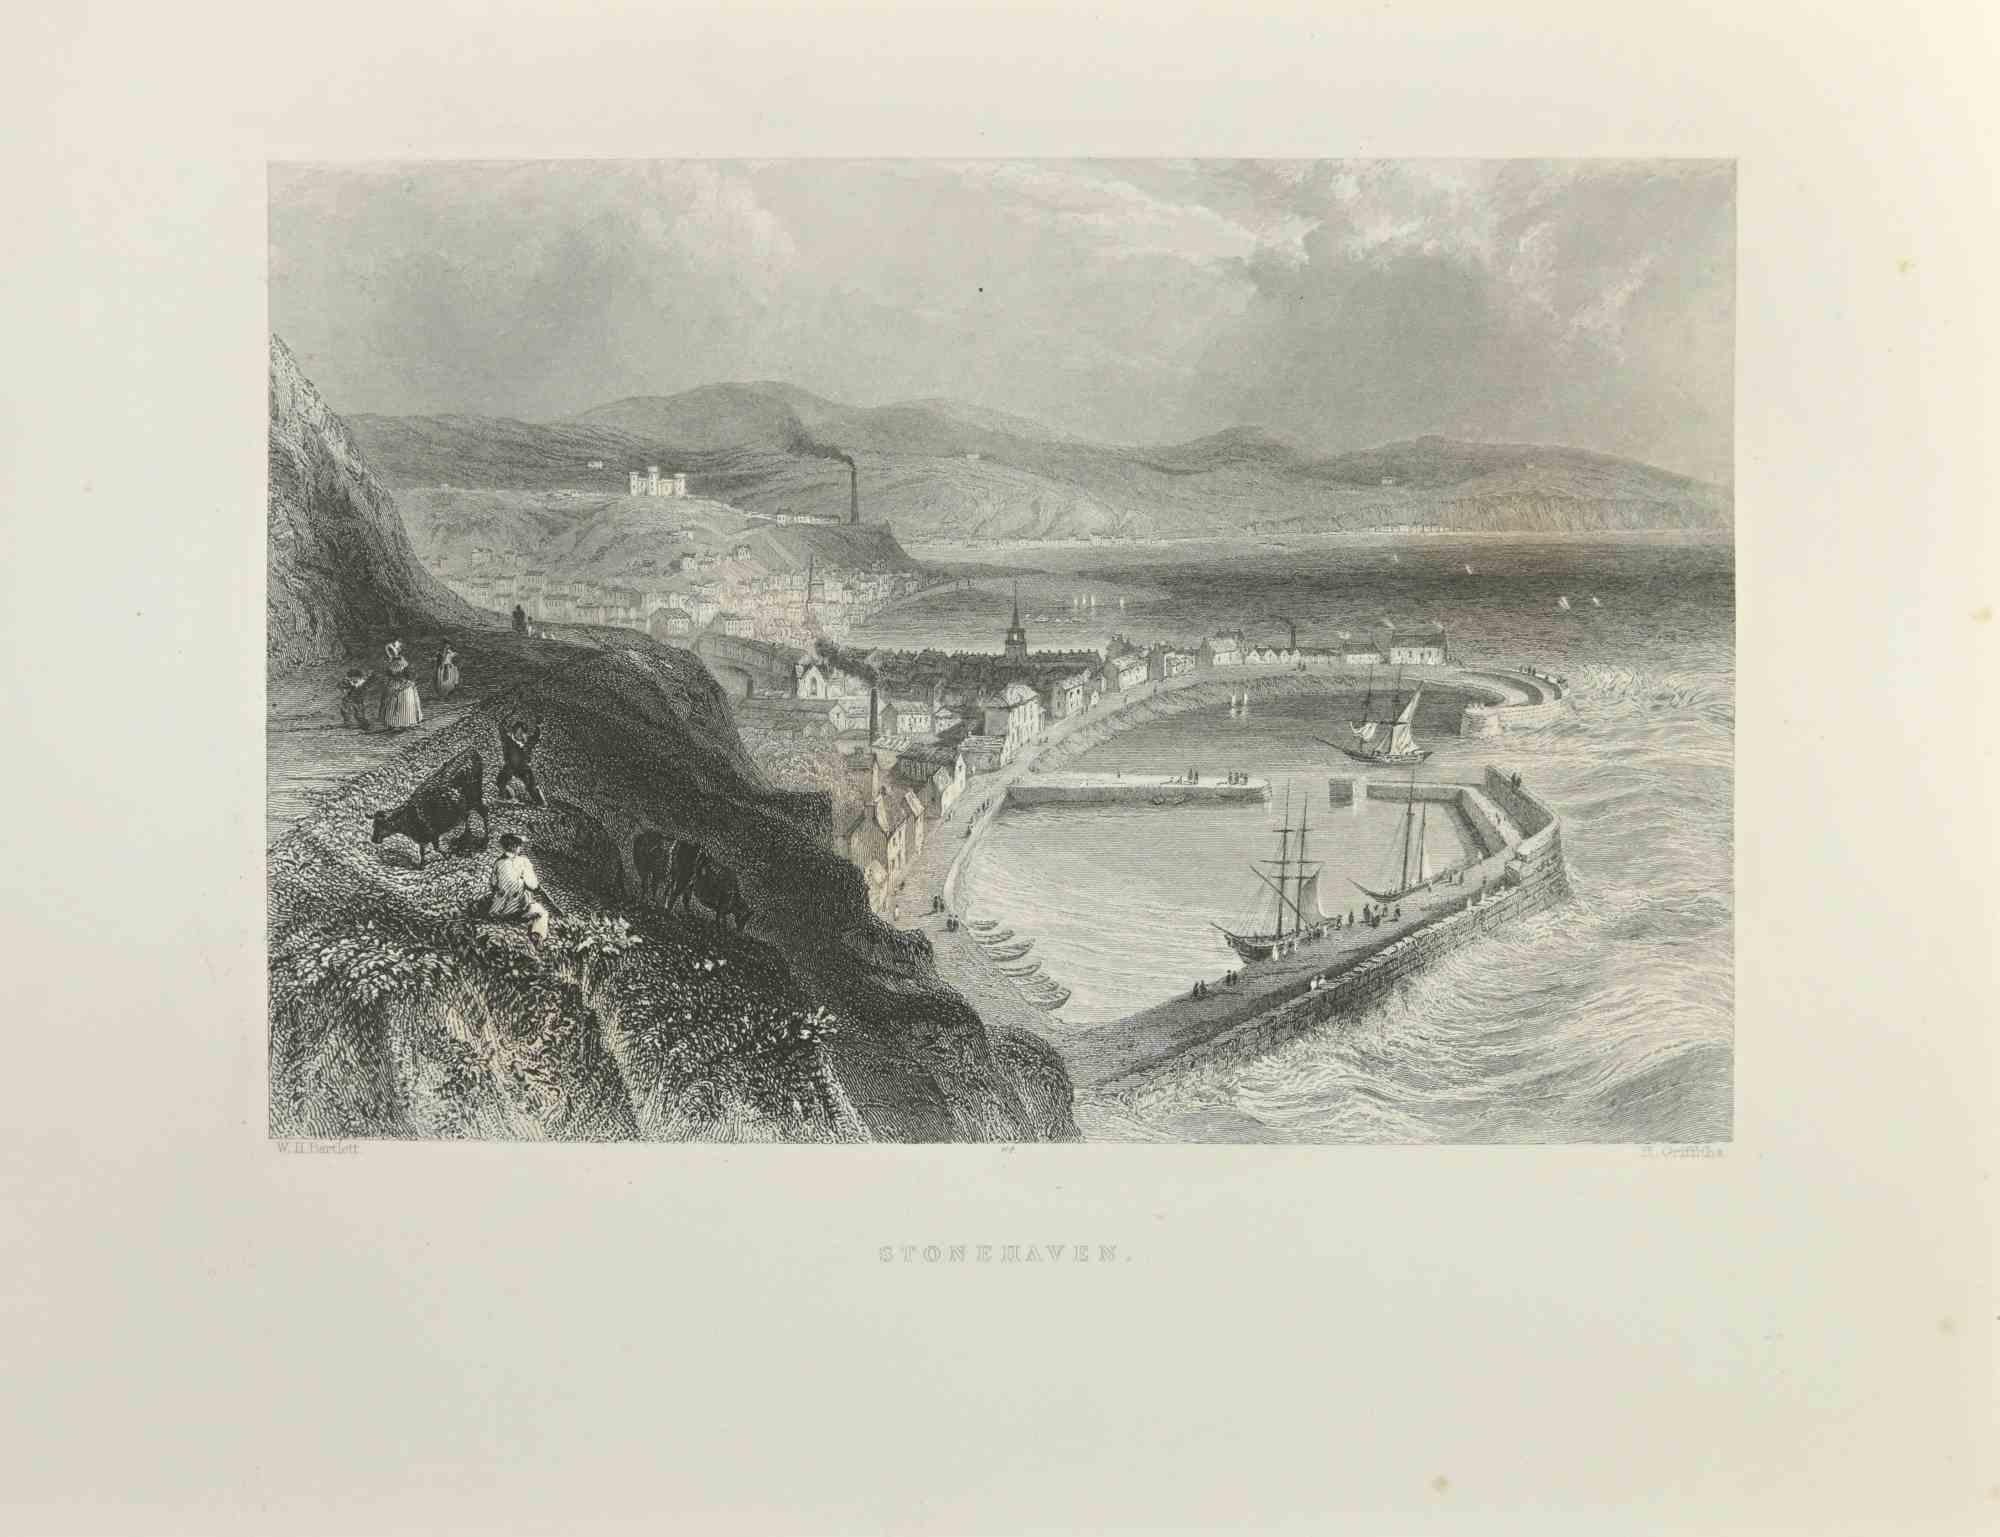 William Henry Bartlett  Figurative Print - Stonehaven - Etching By W.H. Bartlett - 1845